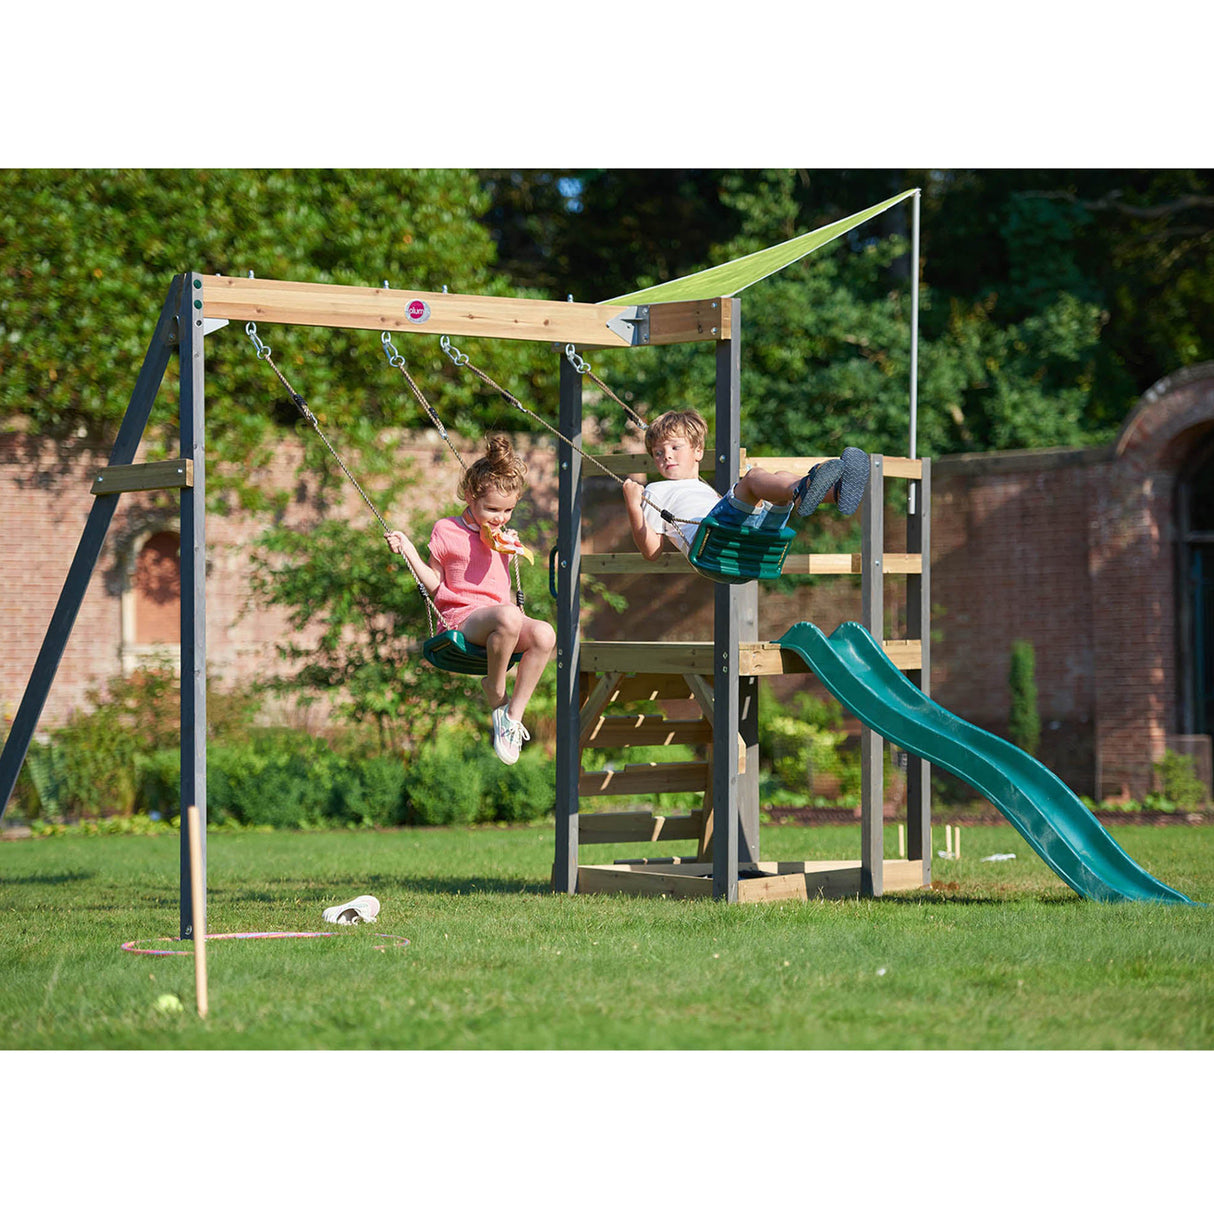 Plum Barbary Wooden Playcentre